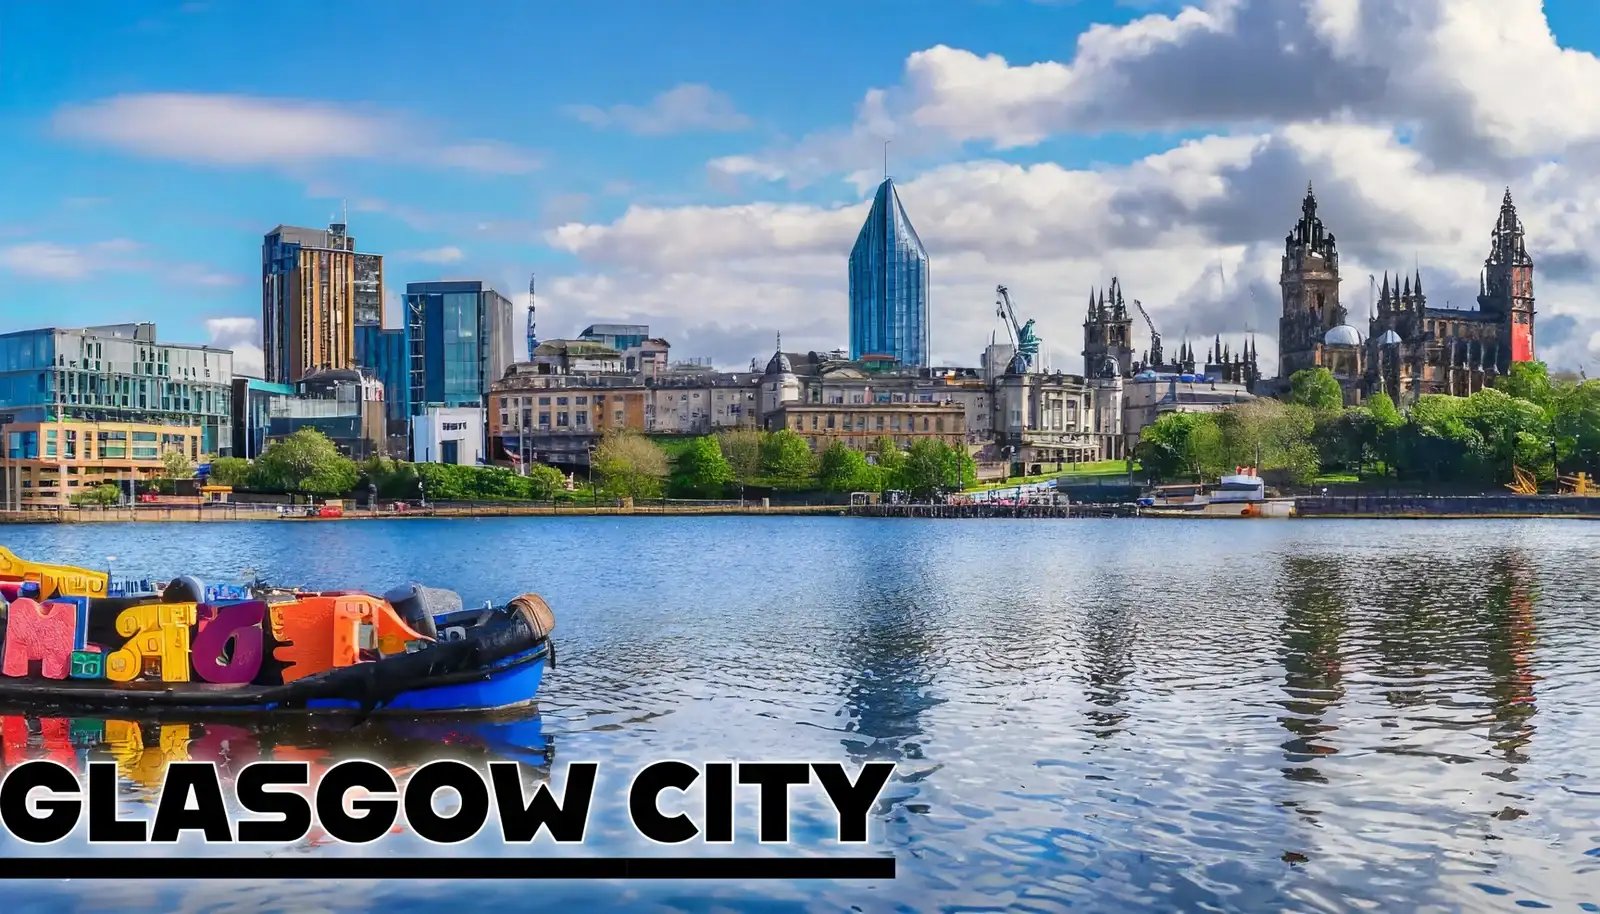 Scenic view of Glasgow cityscape with modern buildings, riverfront and a colorful barge.